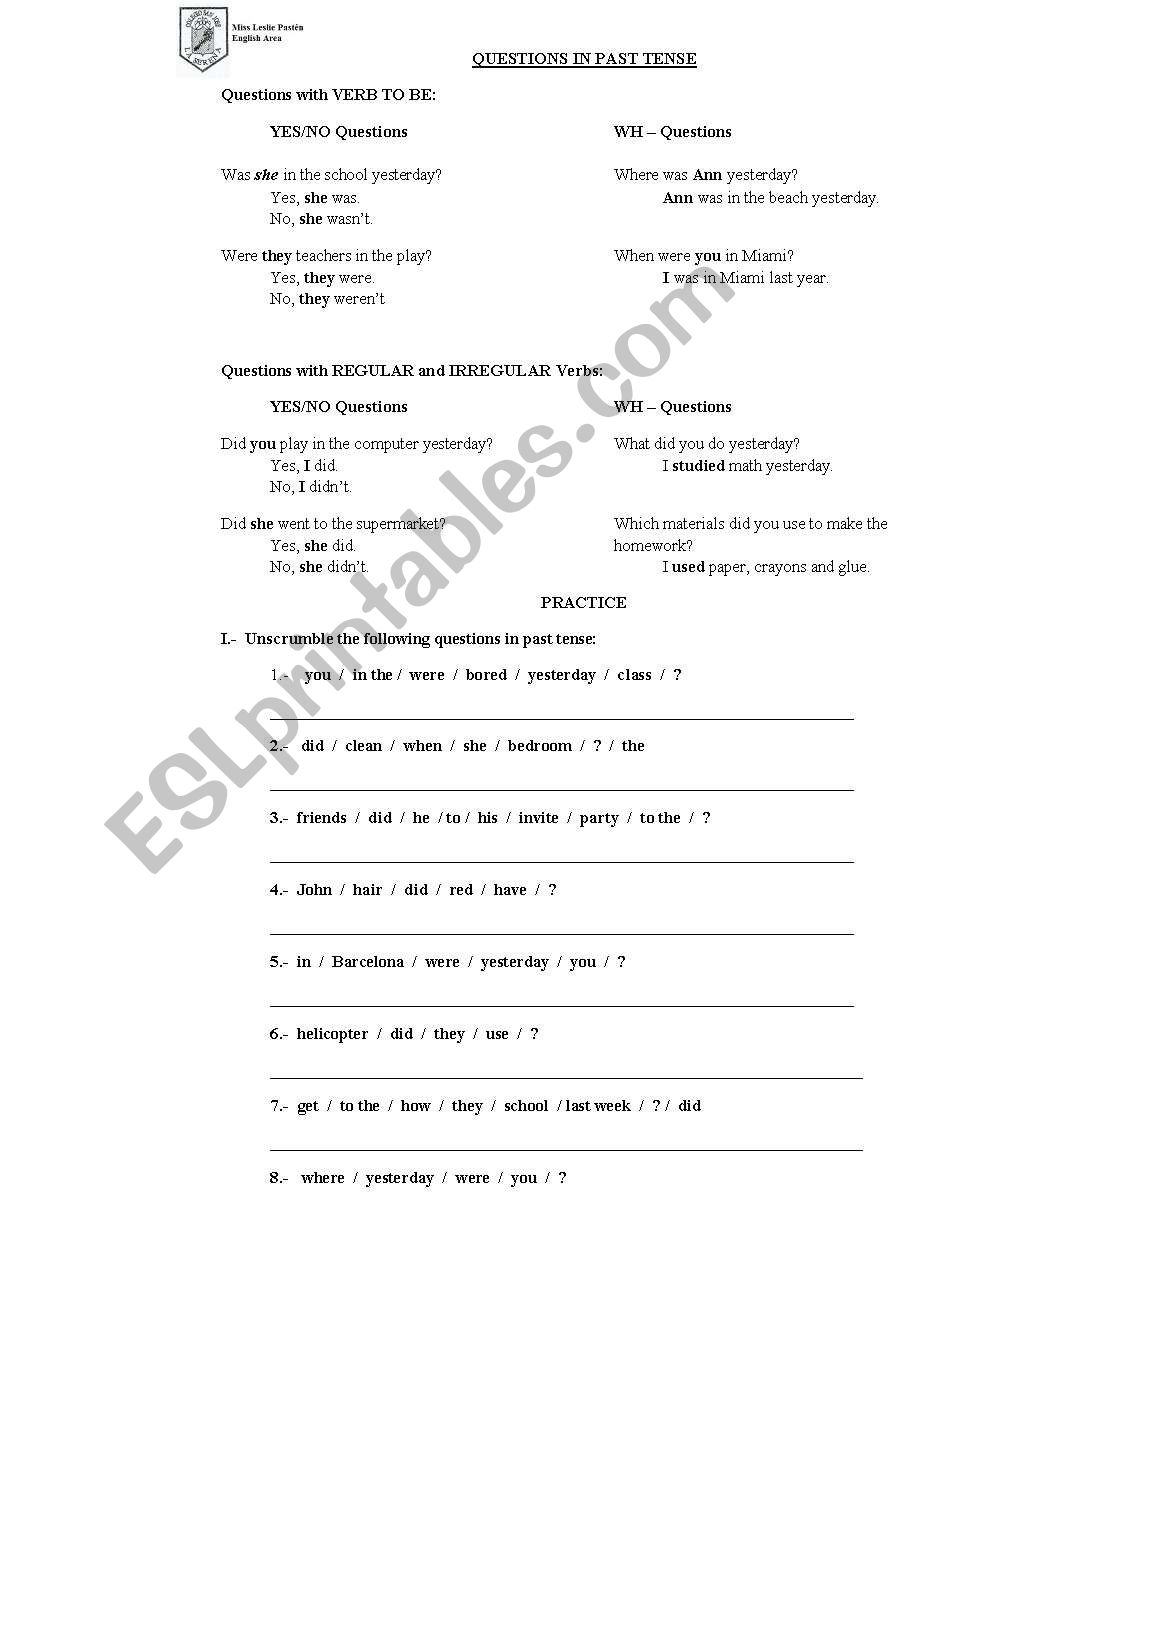 Questions in Past Tense worksheet